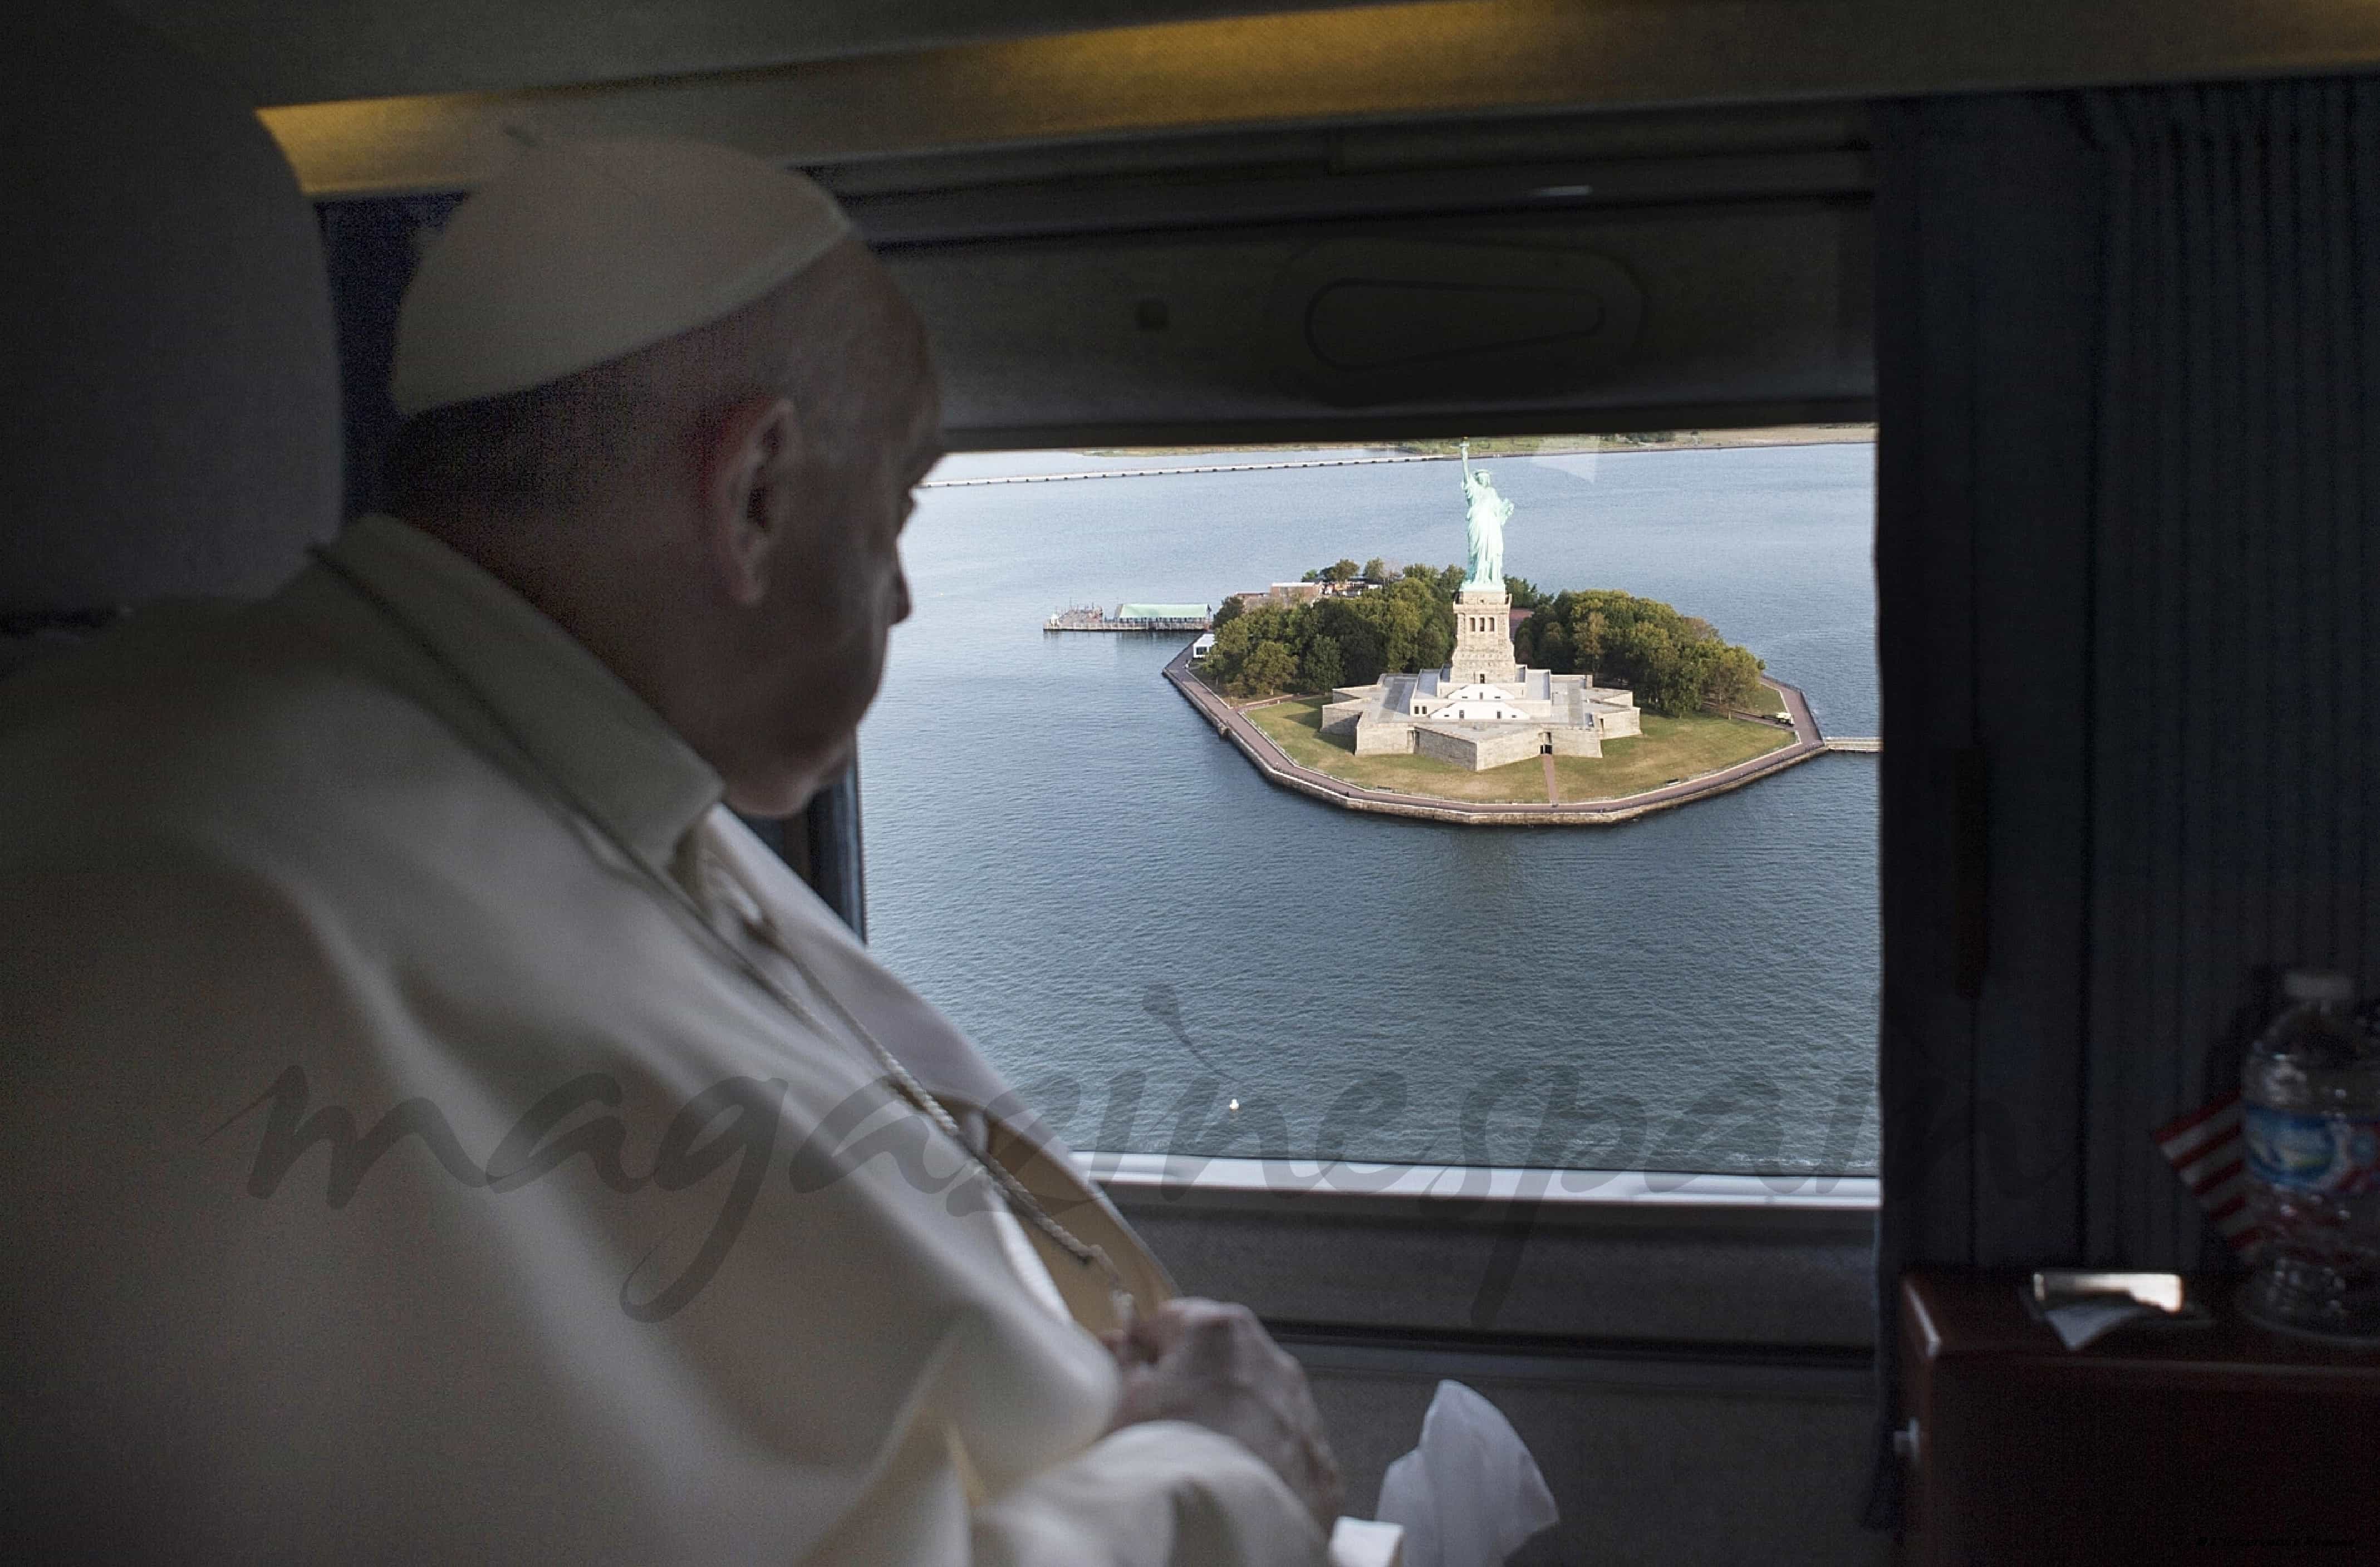 Pope Francis got one last look at statue of Liberty before leaving New York City , USA on September 26, 2015. On his way to JFK Airport Pope Francis took a poignant detour, asking the pilot of his helicopter to circle the Statue of Liberty and Ellis Island, portals to America for millions of immigrants. Photo by ABACAPRESS.COM